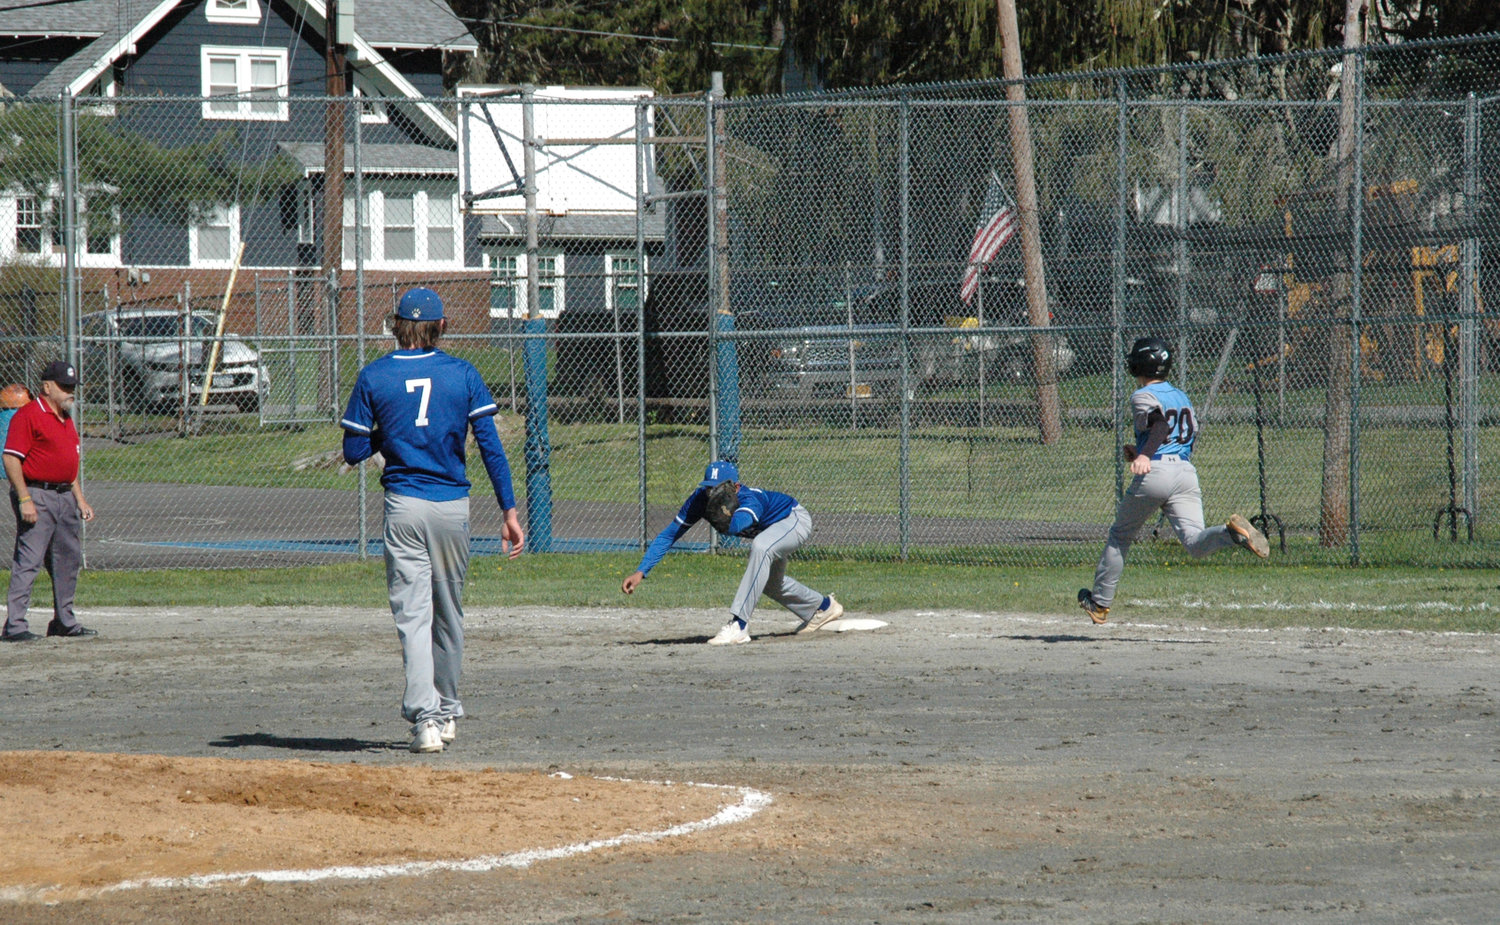 Panthers first baseman Ayush Patel stretches to get the out.